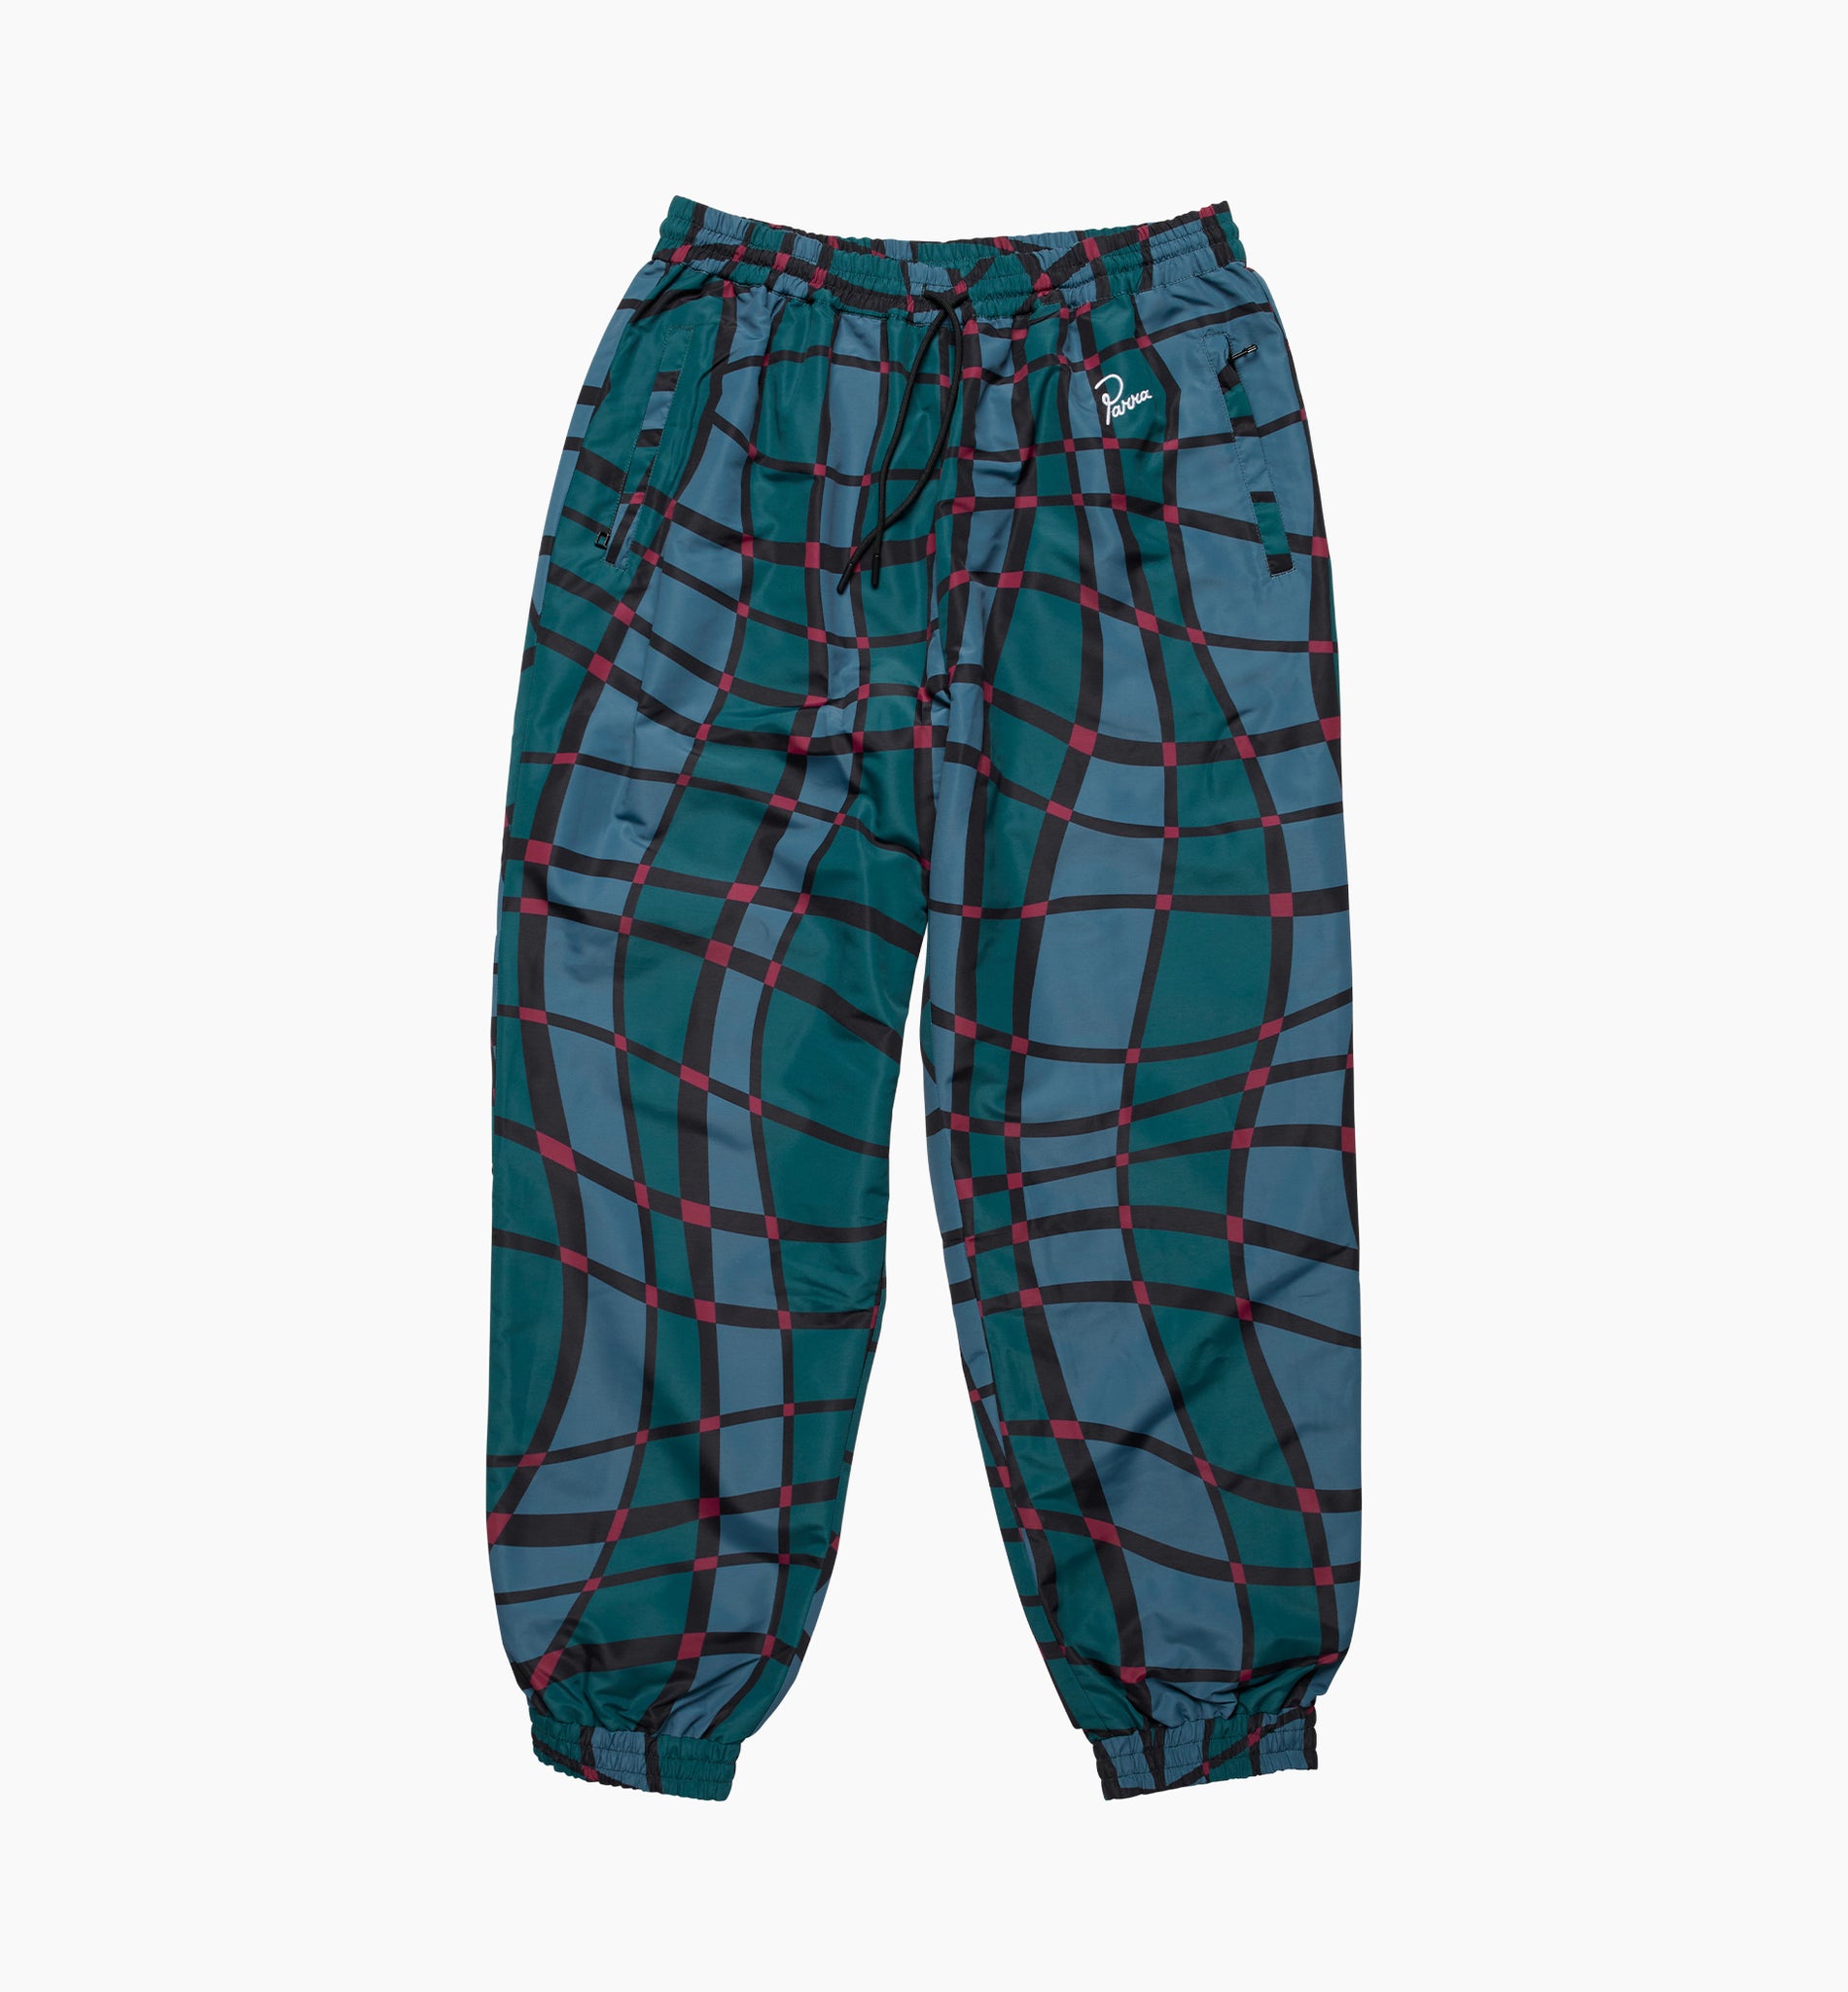 Squared Waves Pattern Track Pant